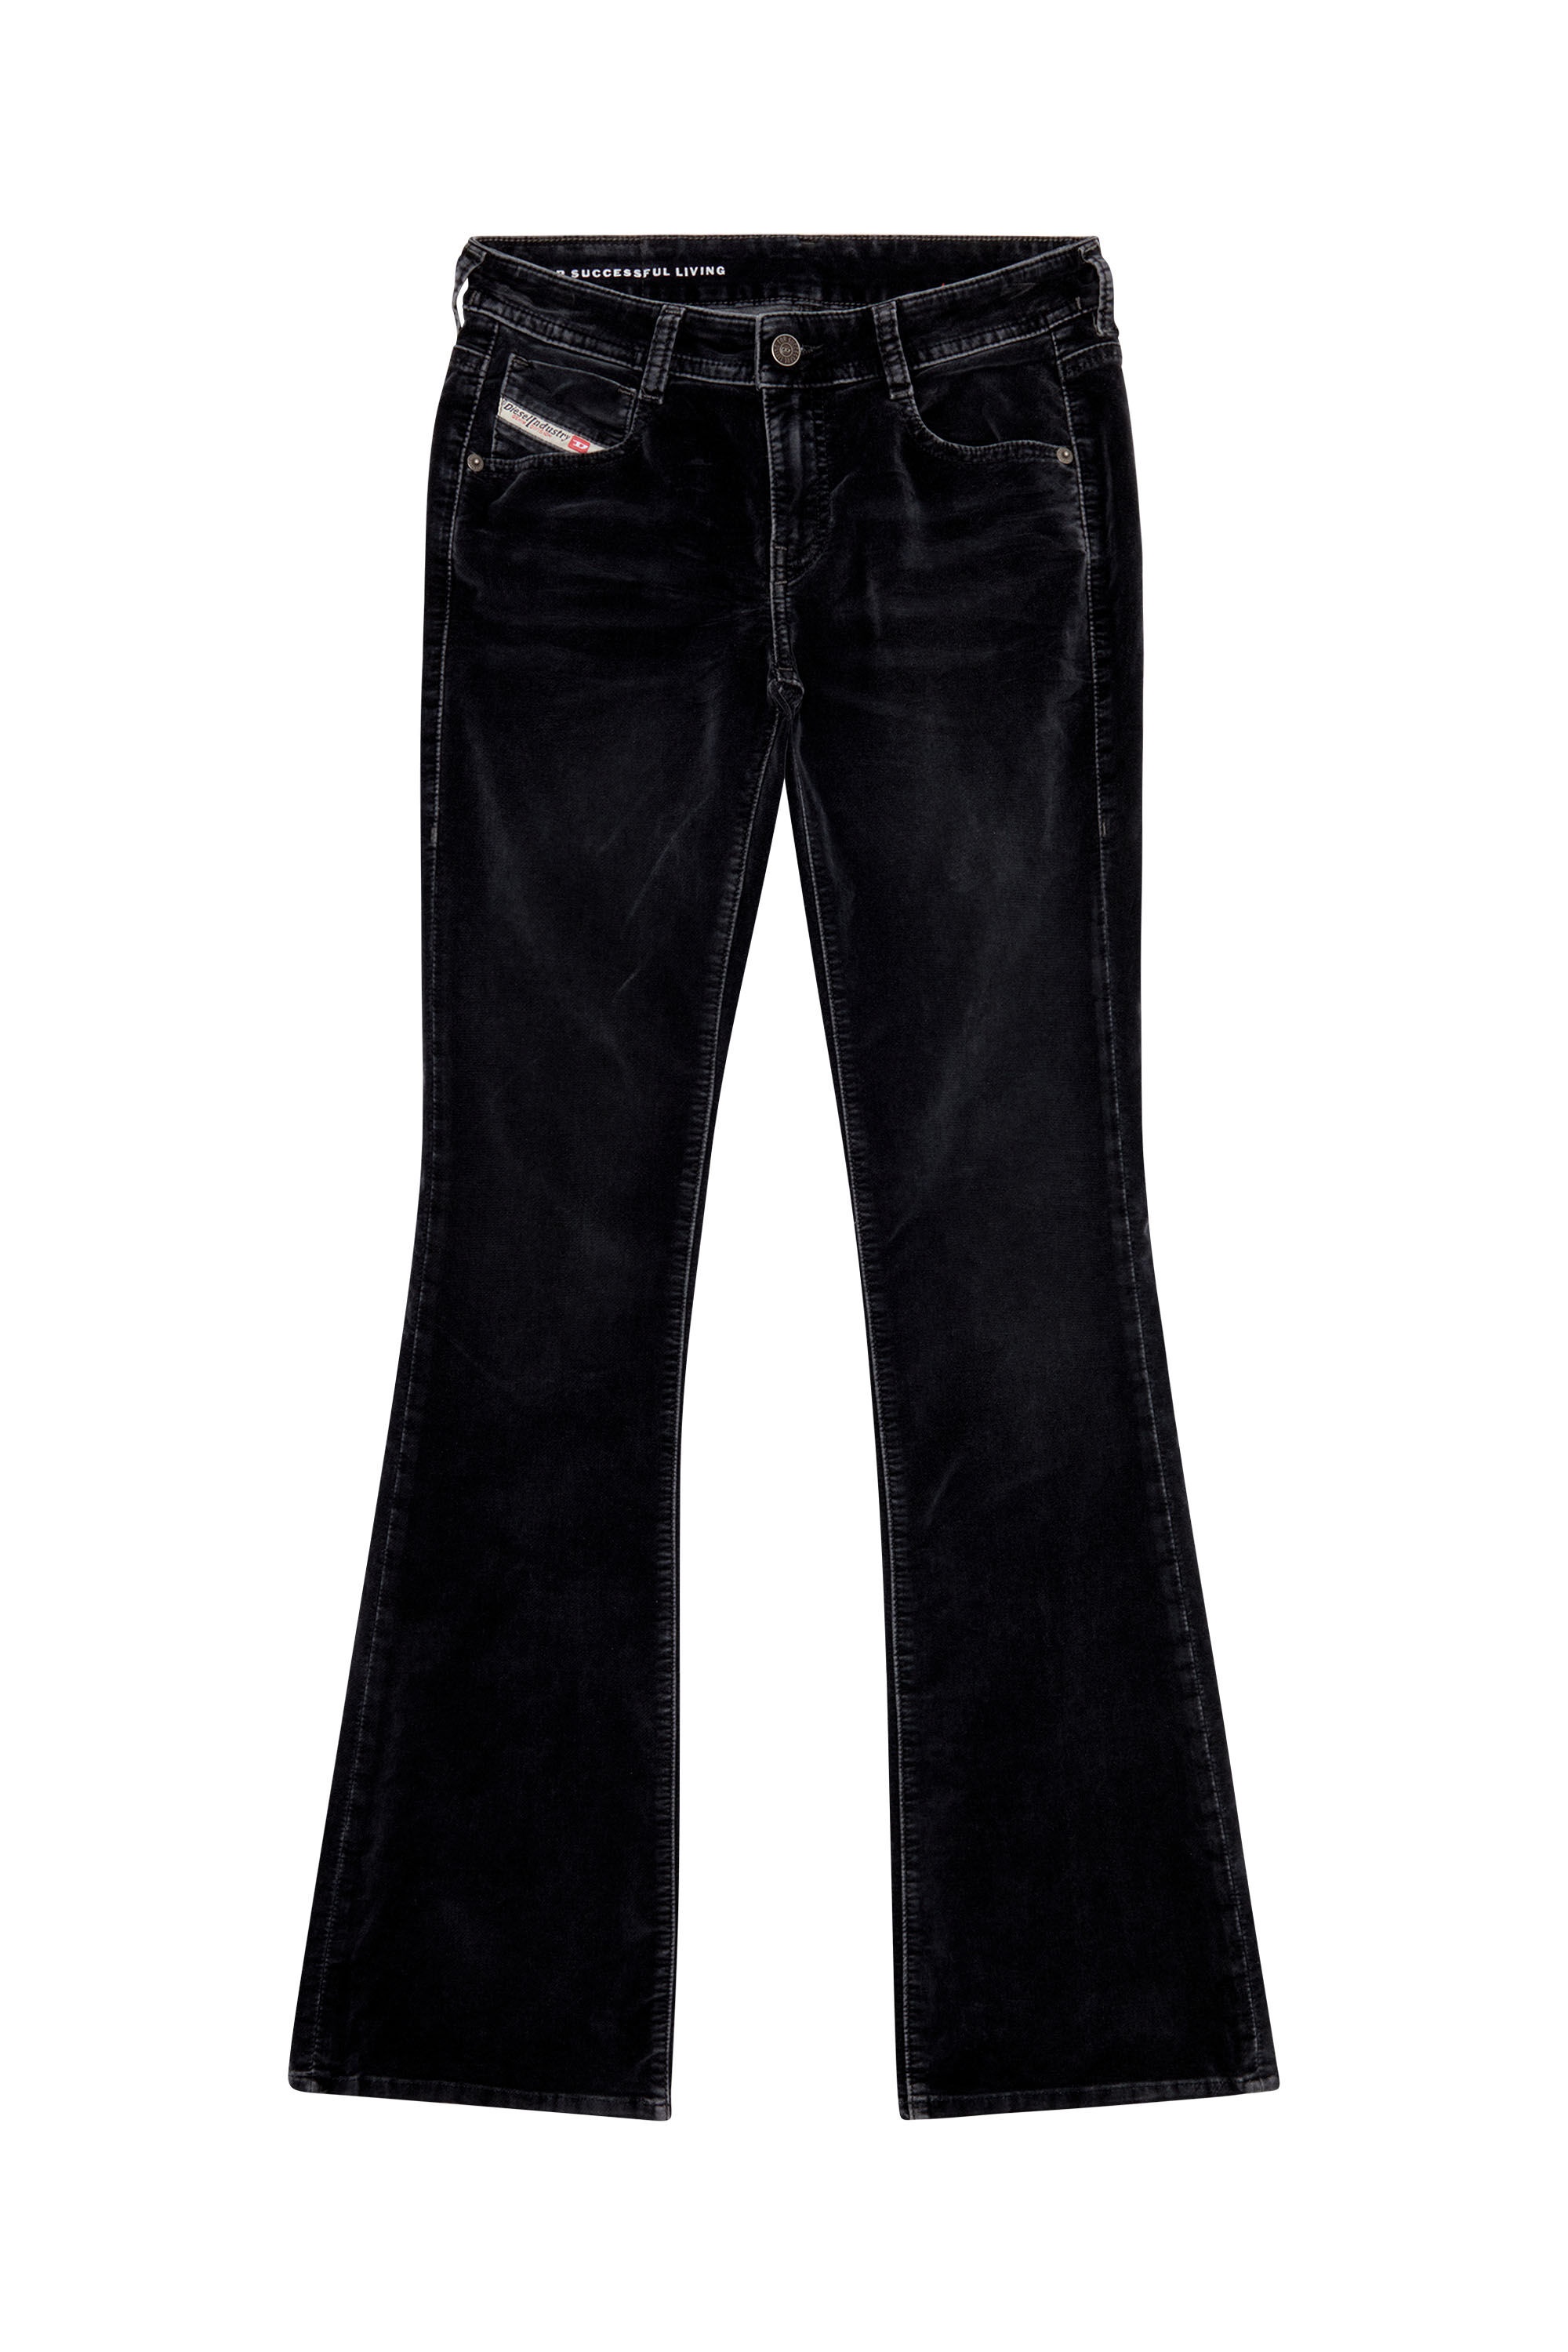 BOOTCUT AND FLARE JEANS 1969 D-EBBEY 003HL - 1